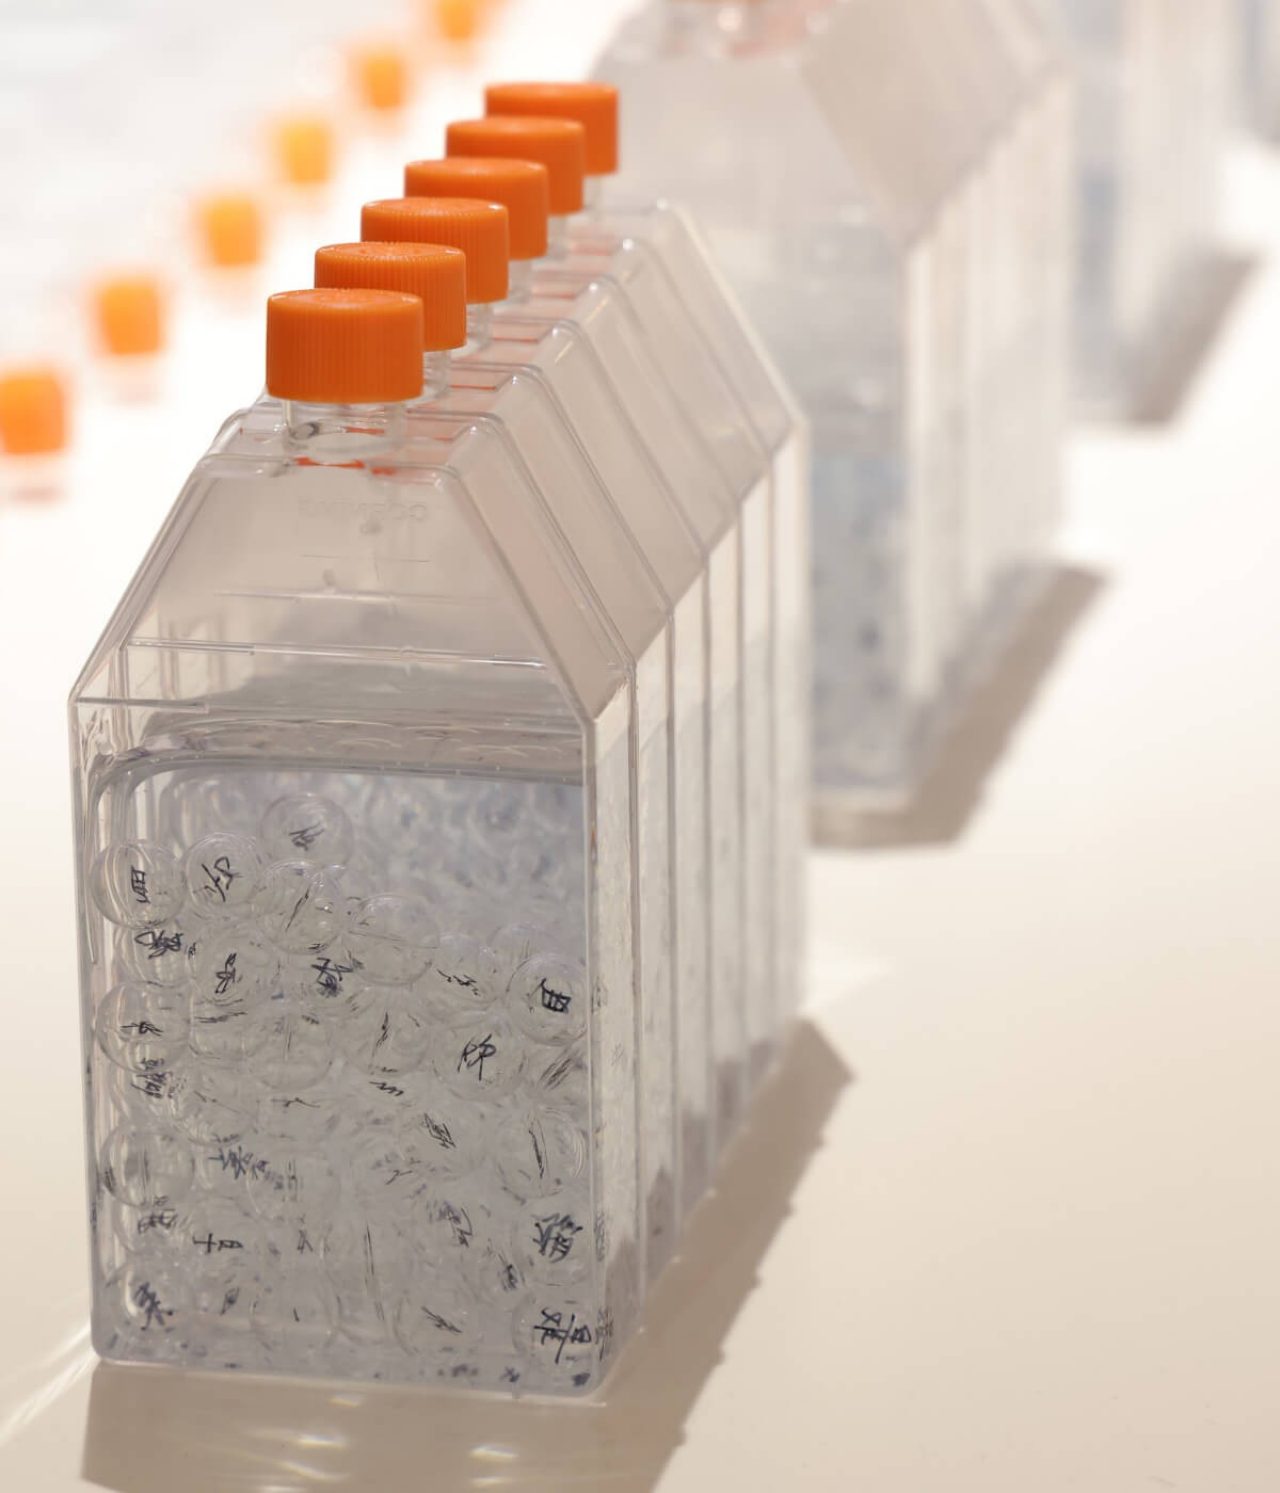 A group of six clear plastic bottles with orange caps. Each contains pieces of deconstructed poem etched onto glass beads. There are many of the beads in the bottle.